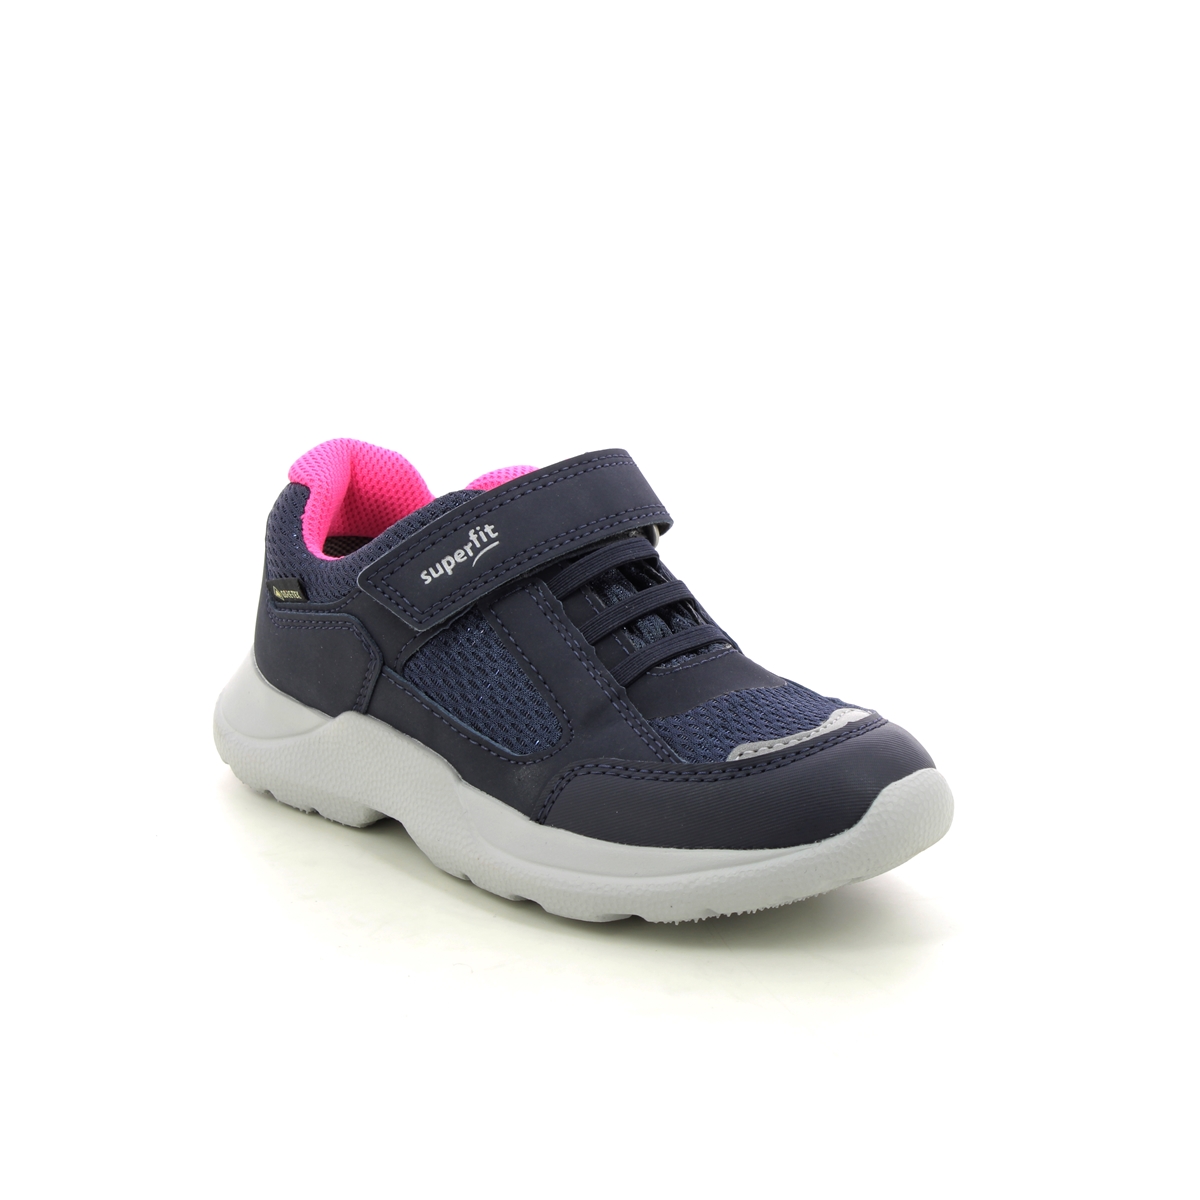 Superfit Rush Jnr G Gtx Navy Purple Kids girls trainers 1006225-8020 in a Plain Man-made in Size 28